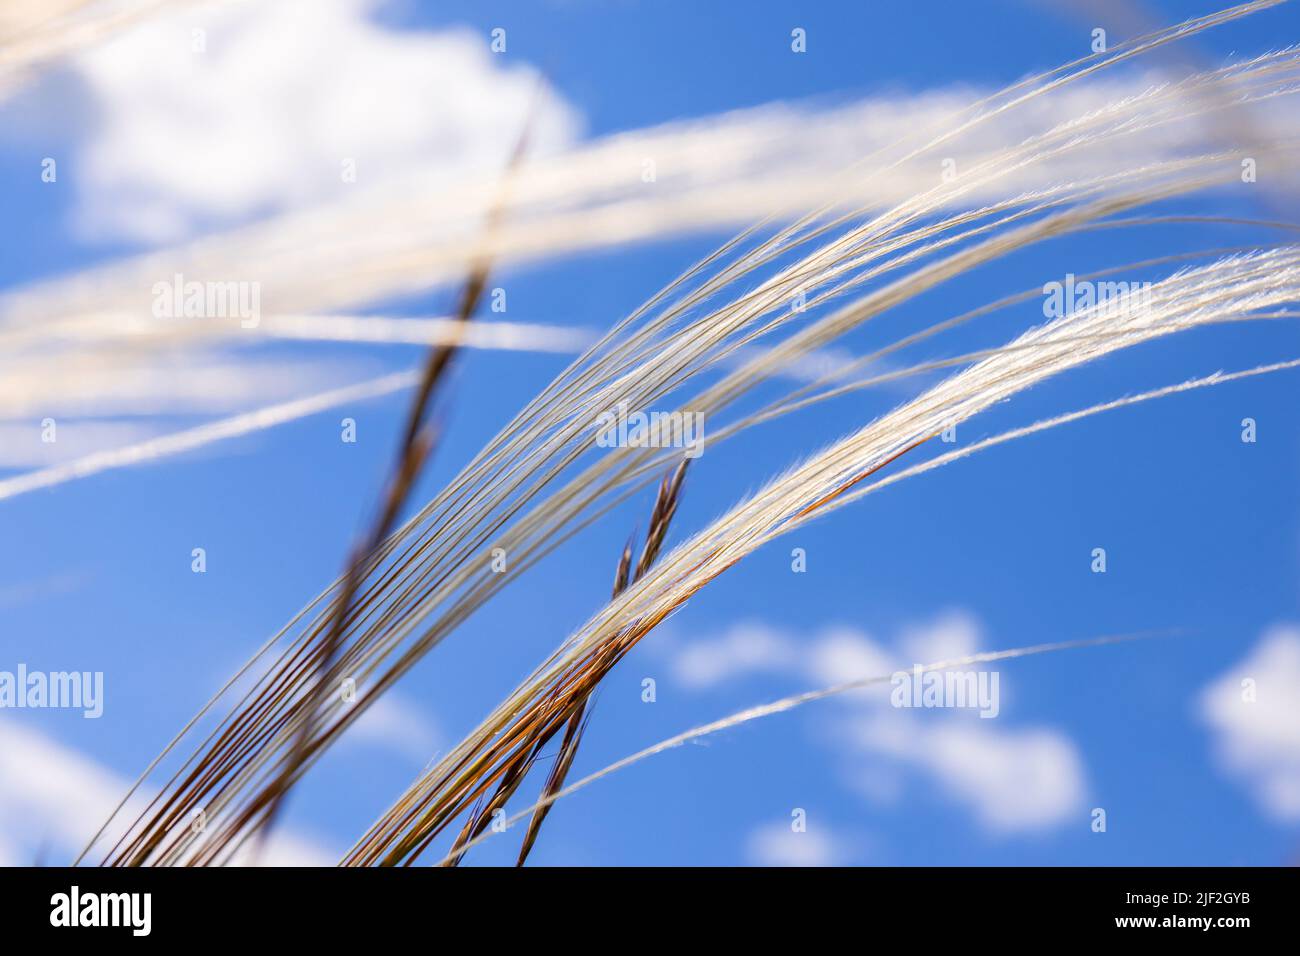 Feather grass against a blue sky Stock Photo